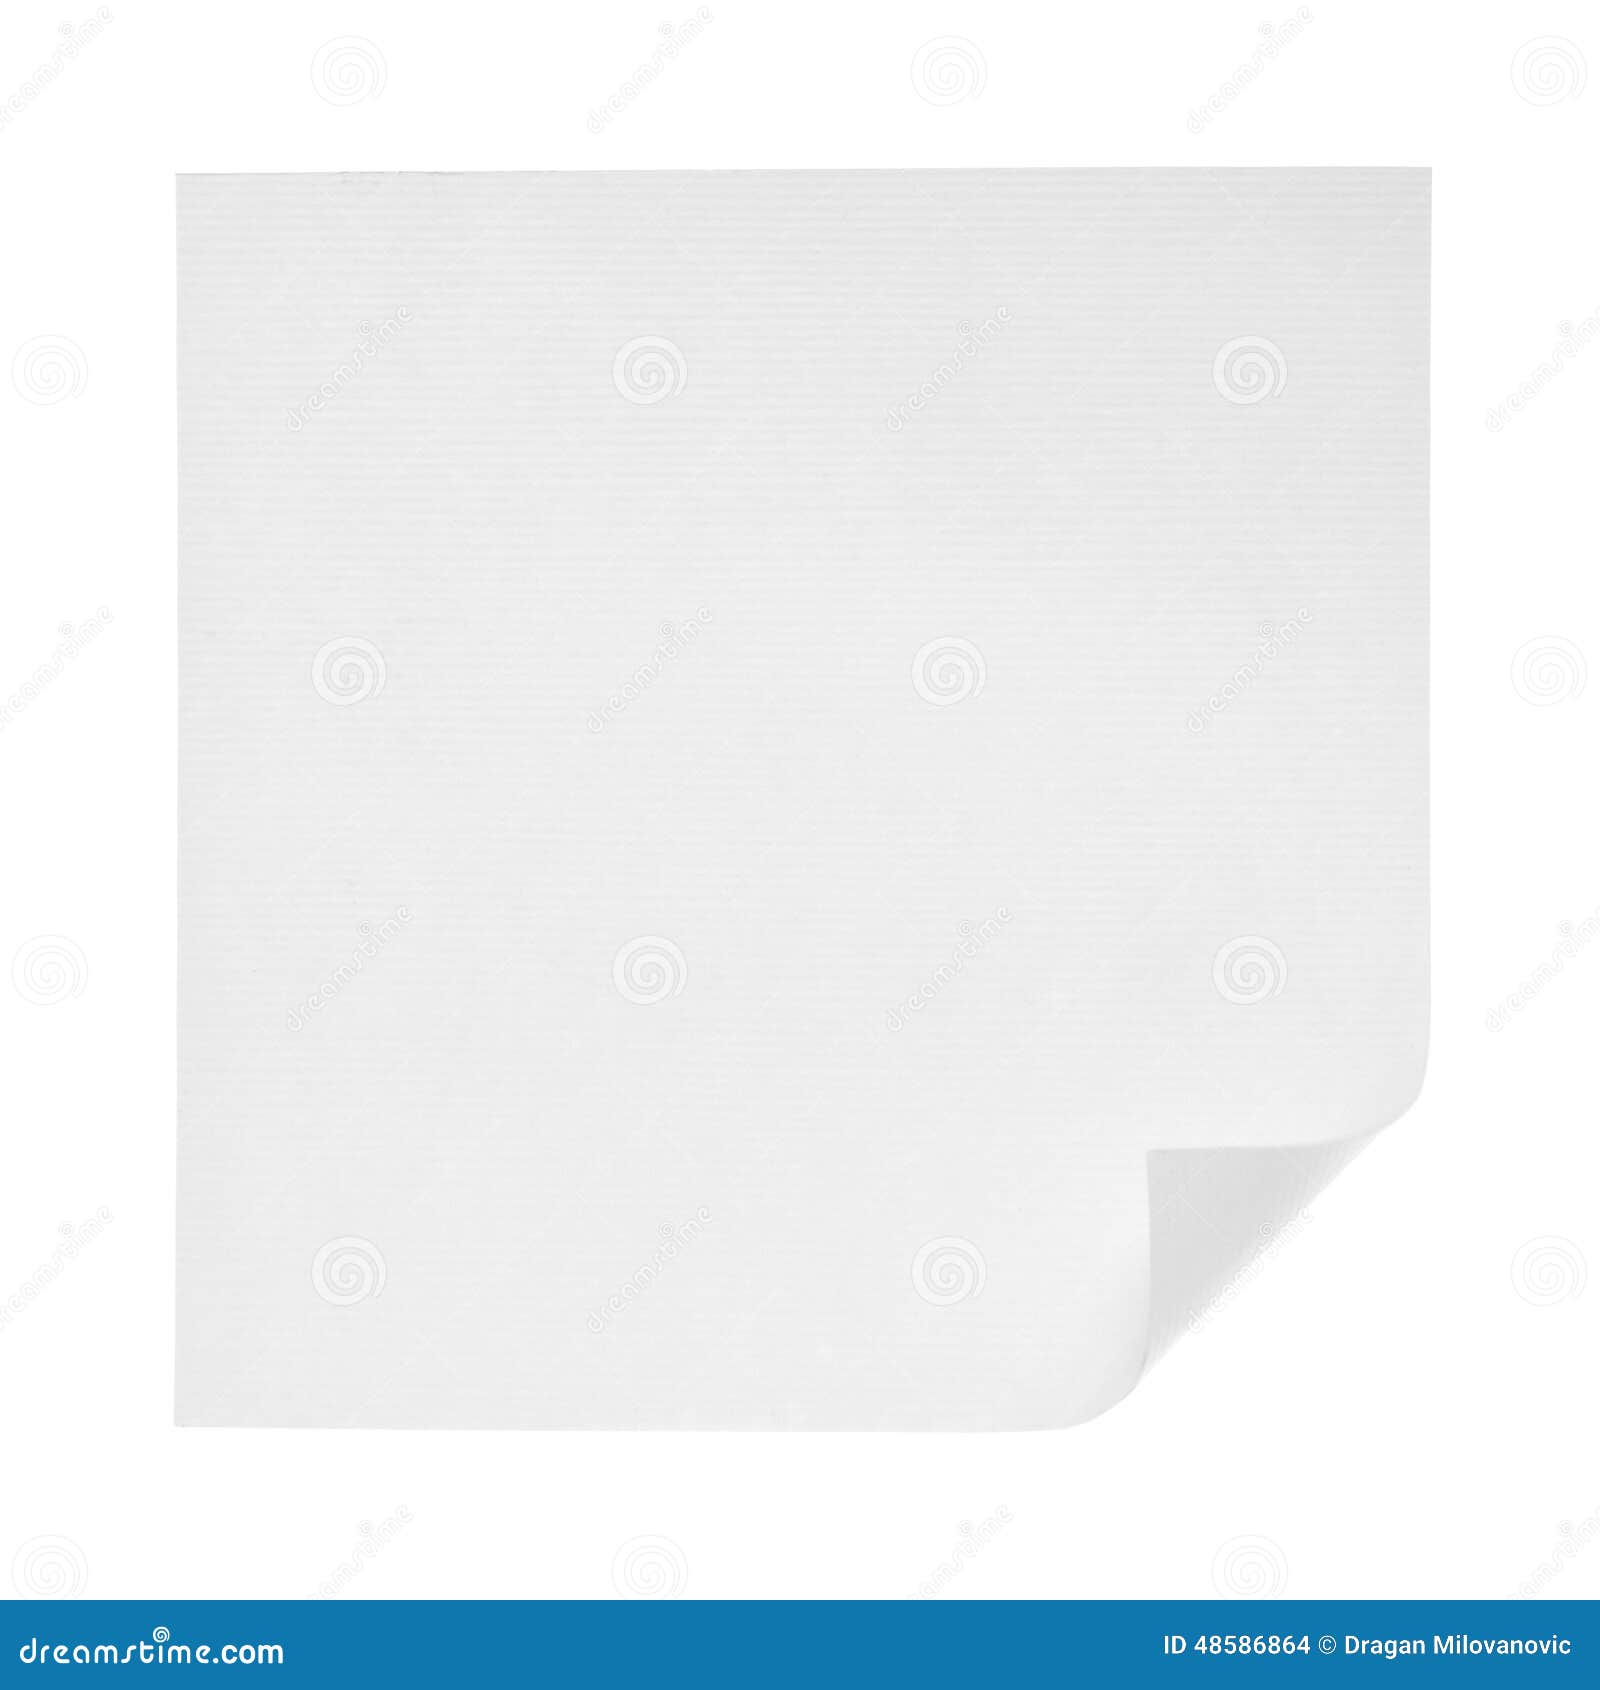 White Ribbed Paper As Background Stock Photo - Download Image Now